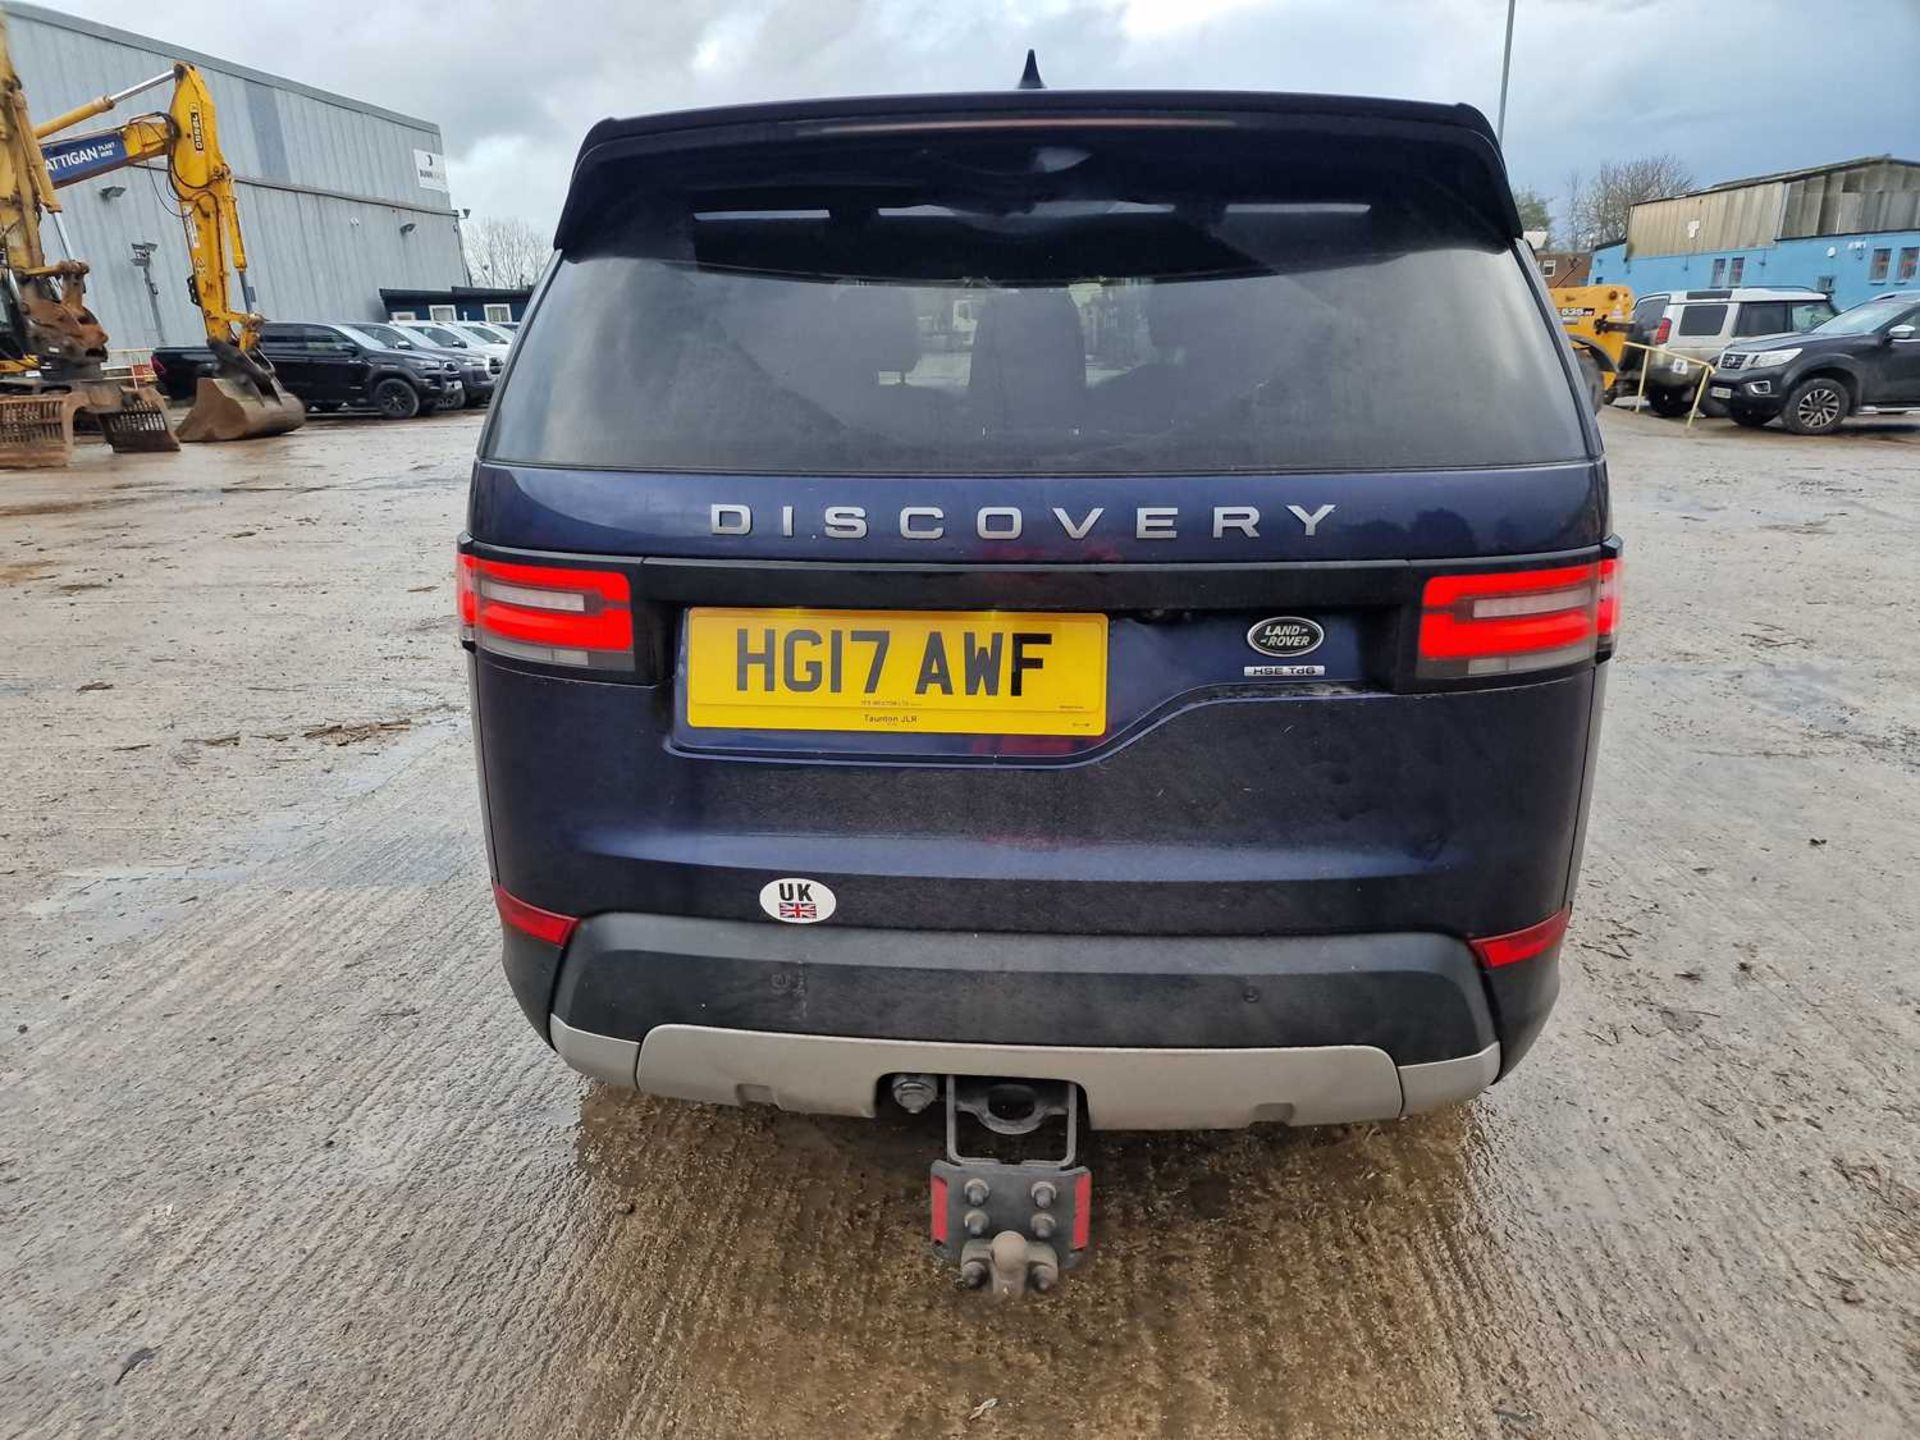 Landrover Discovery HSE Td6, Auto, Paddle Shift, Reverse Camera, Sat Nav, Parking Sensors, Full Leat - Image 4 of 75